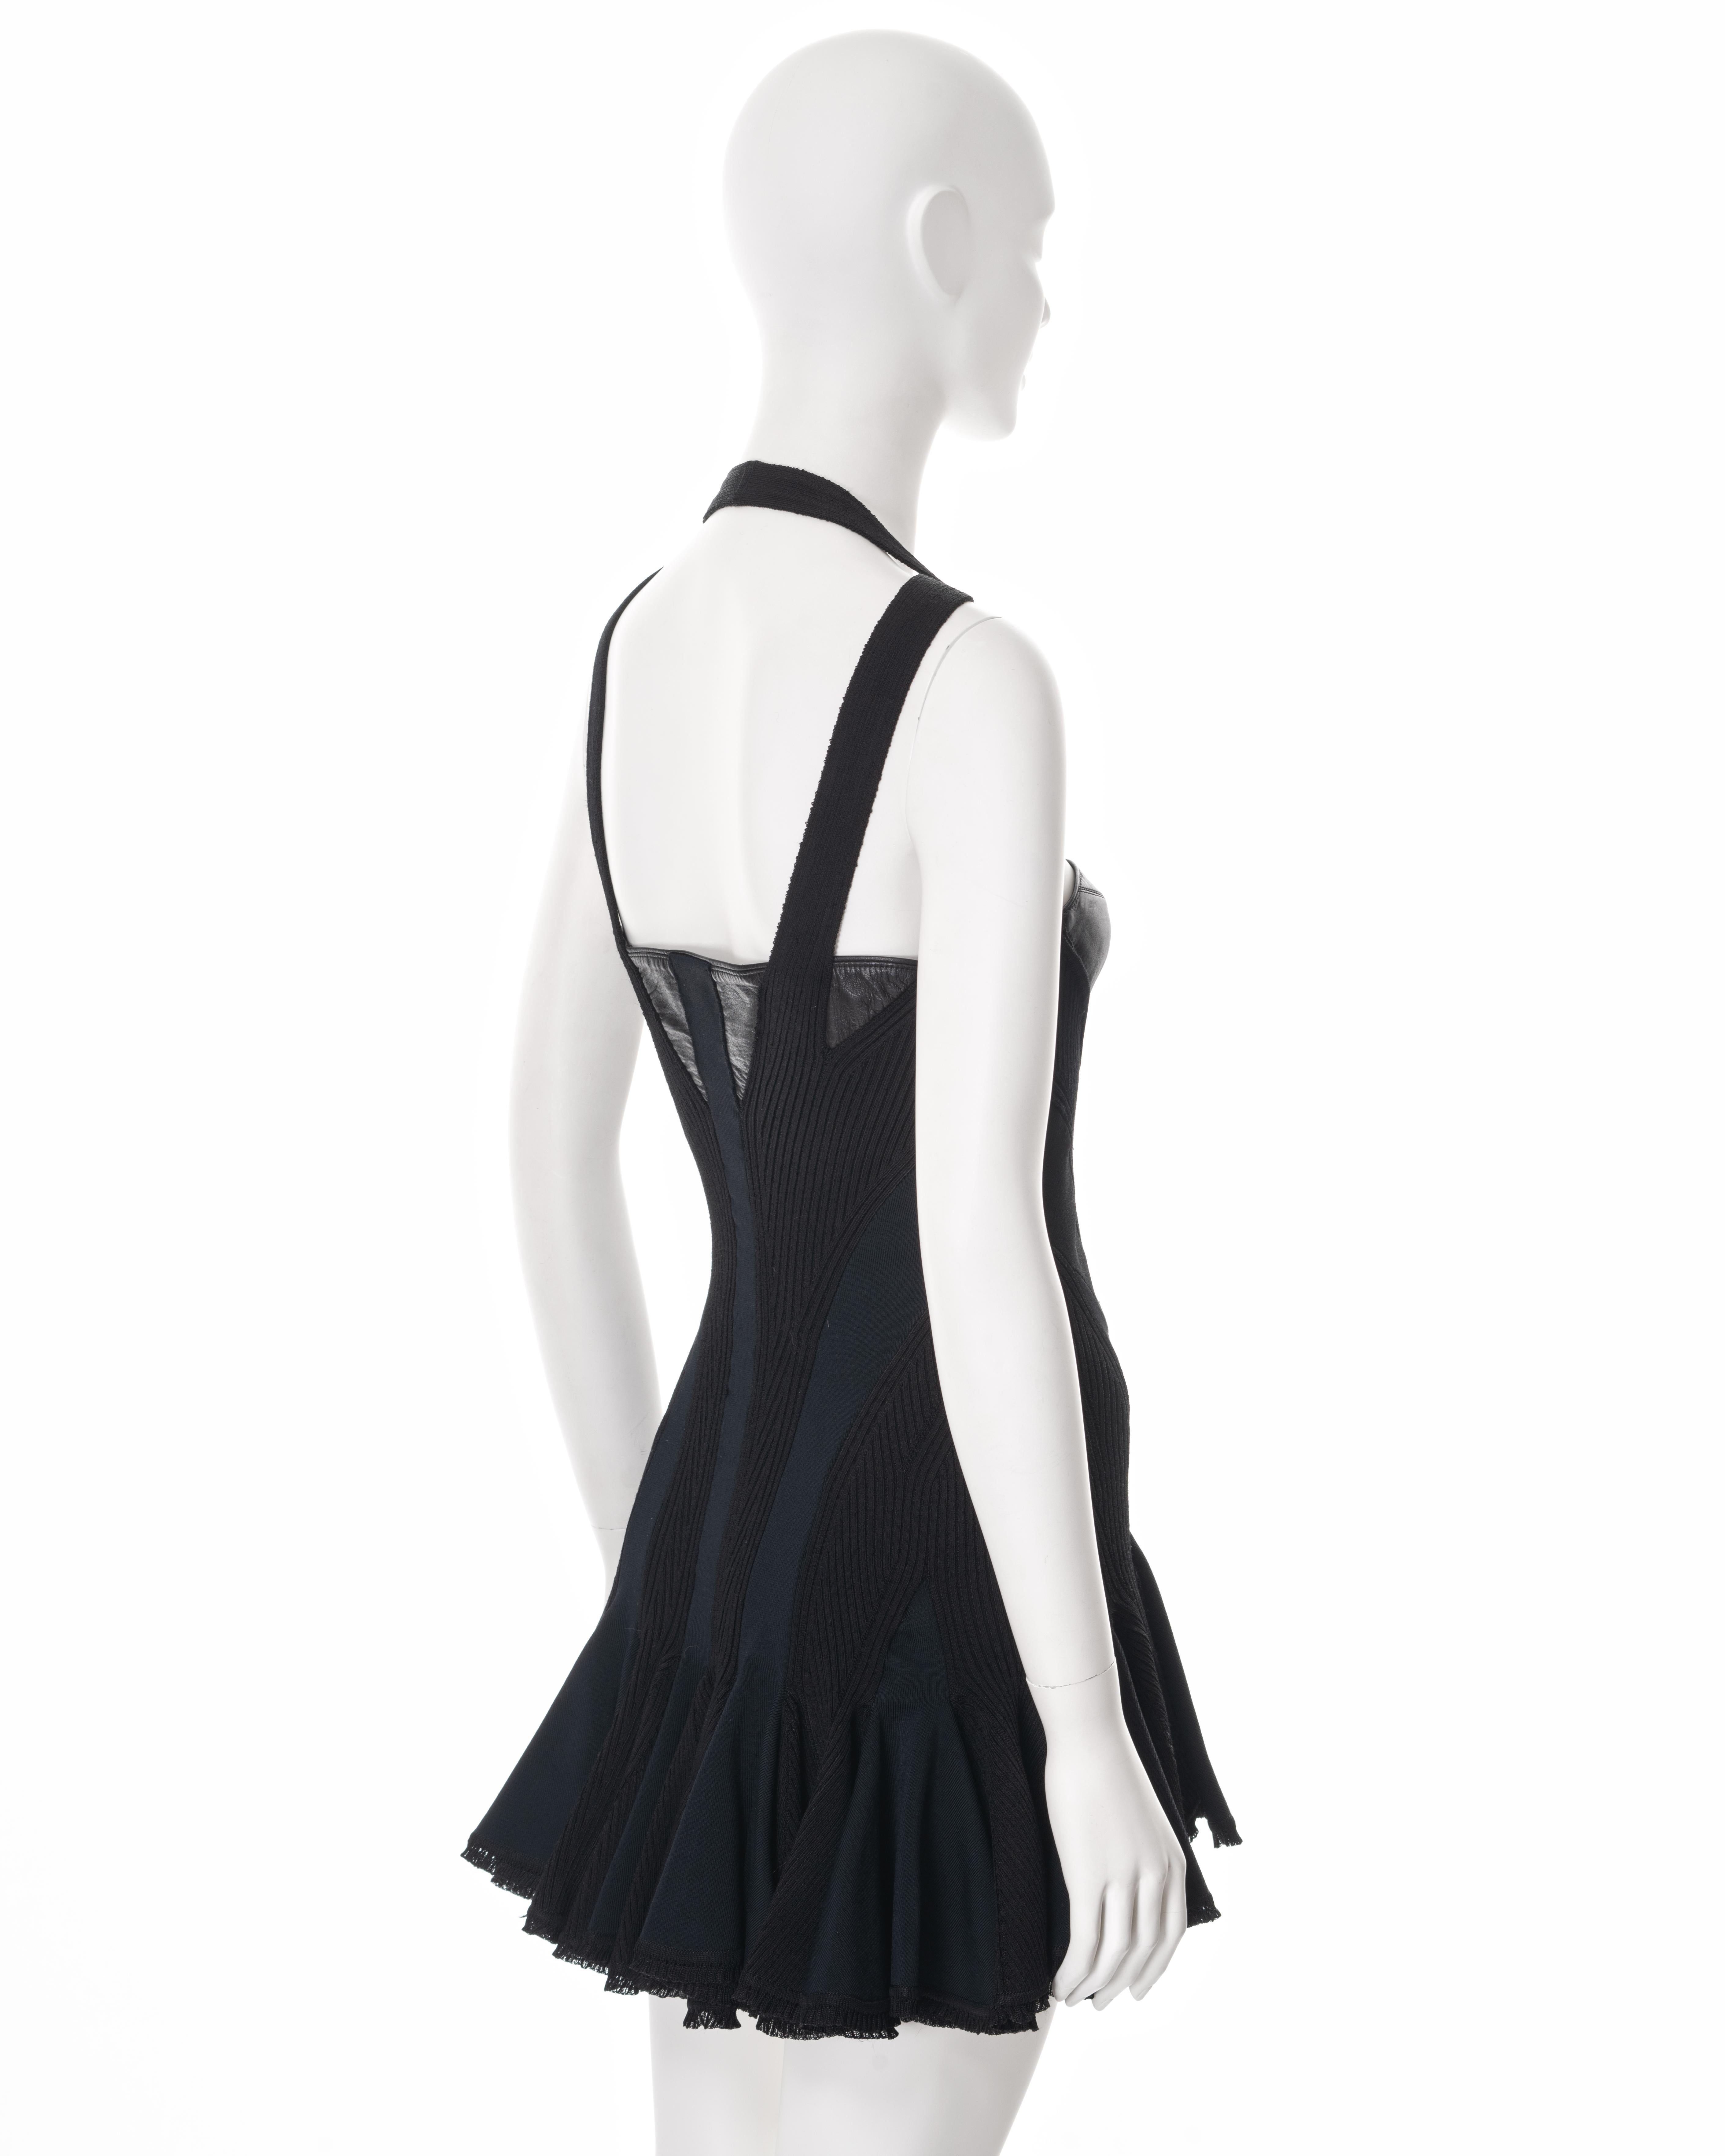 Alexander McQueen black rib knit mini dress with leather bustier, ss 2004 For Sale 3